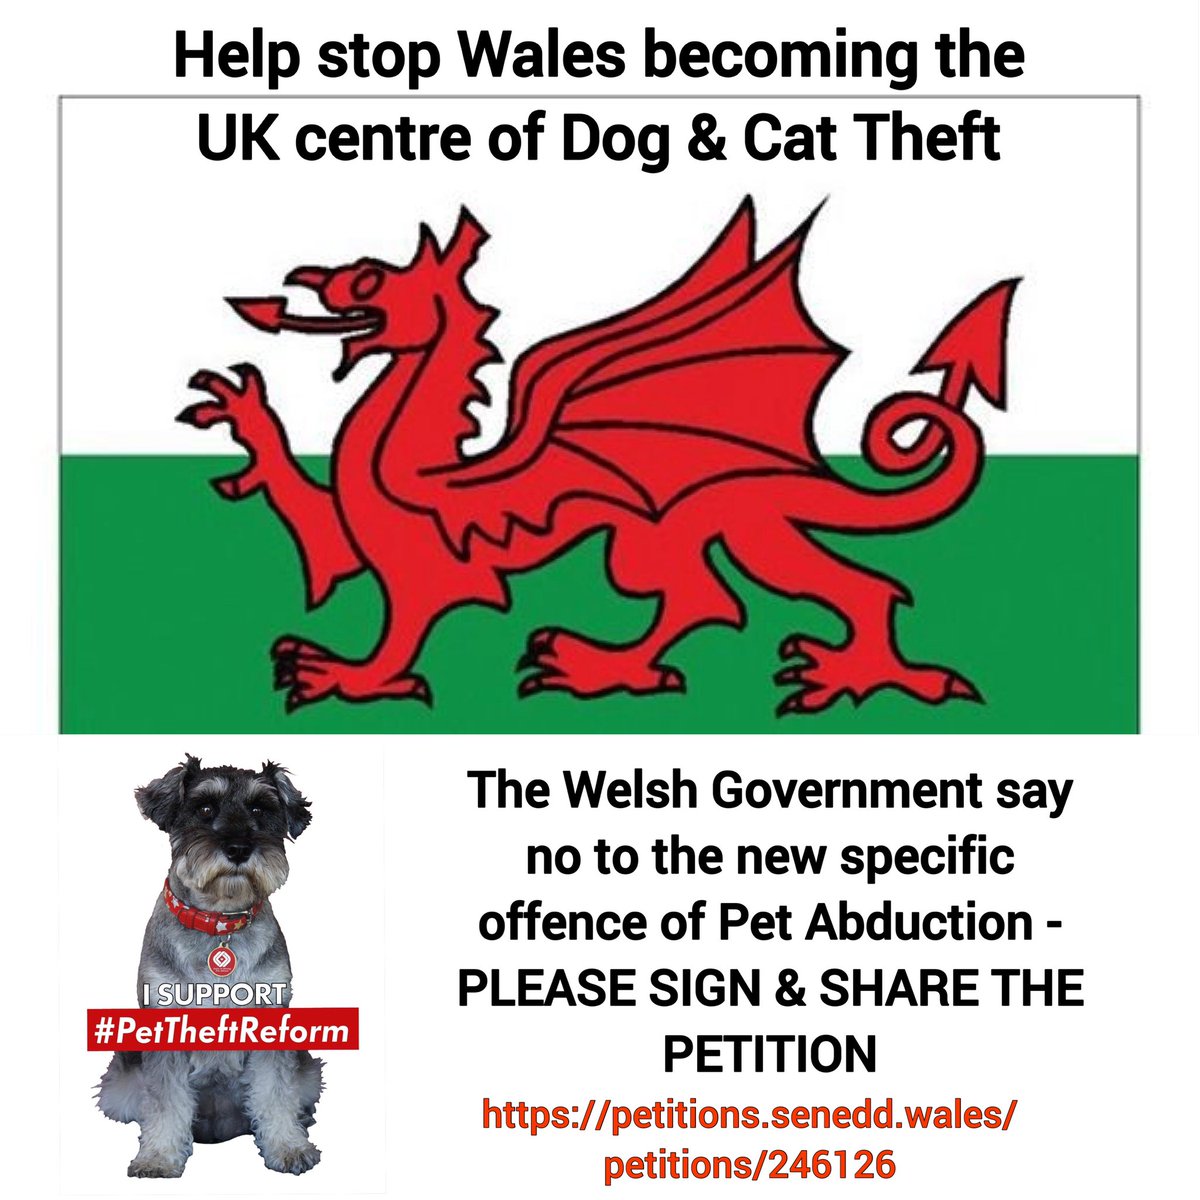 The @WelshGovernment say NO to introducing the specific offence of #PetAbduction in their #AnimalWelfarePlan PLS SIGN & SHARE this important #Petition Anyone from the #UK can SIGN on this link: petitions.senedd.wales/petitions/2461…